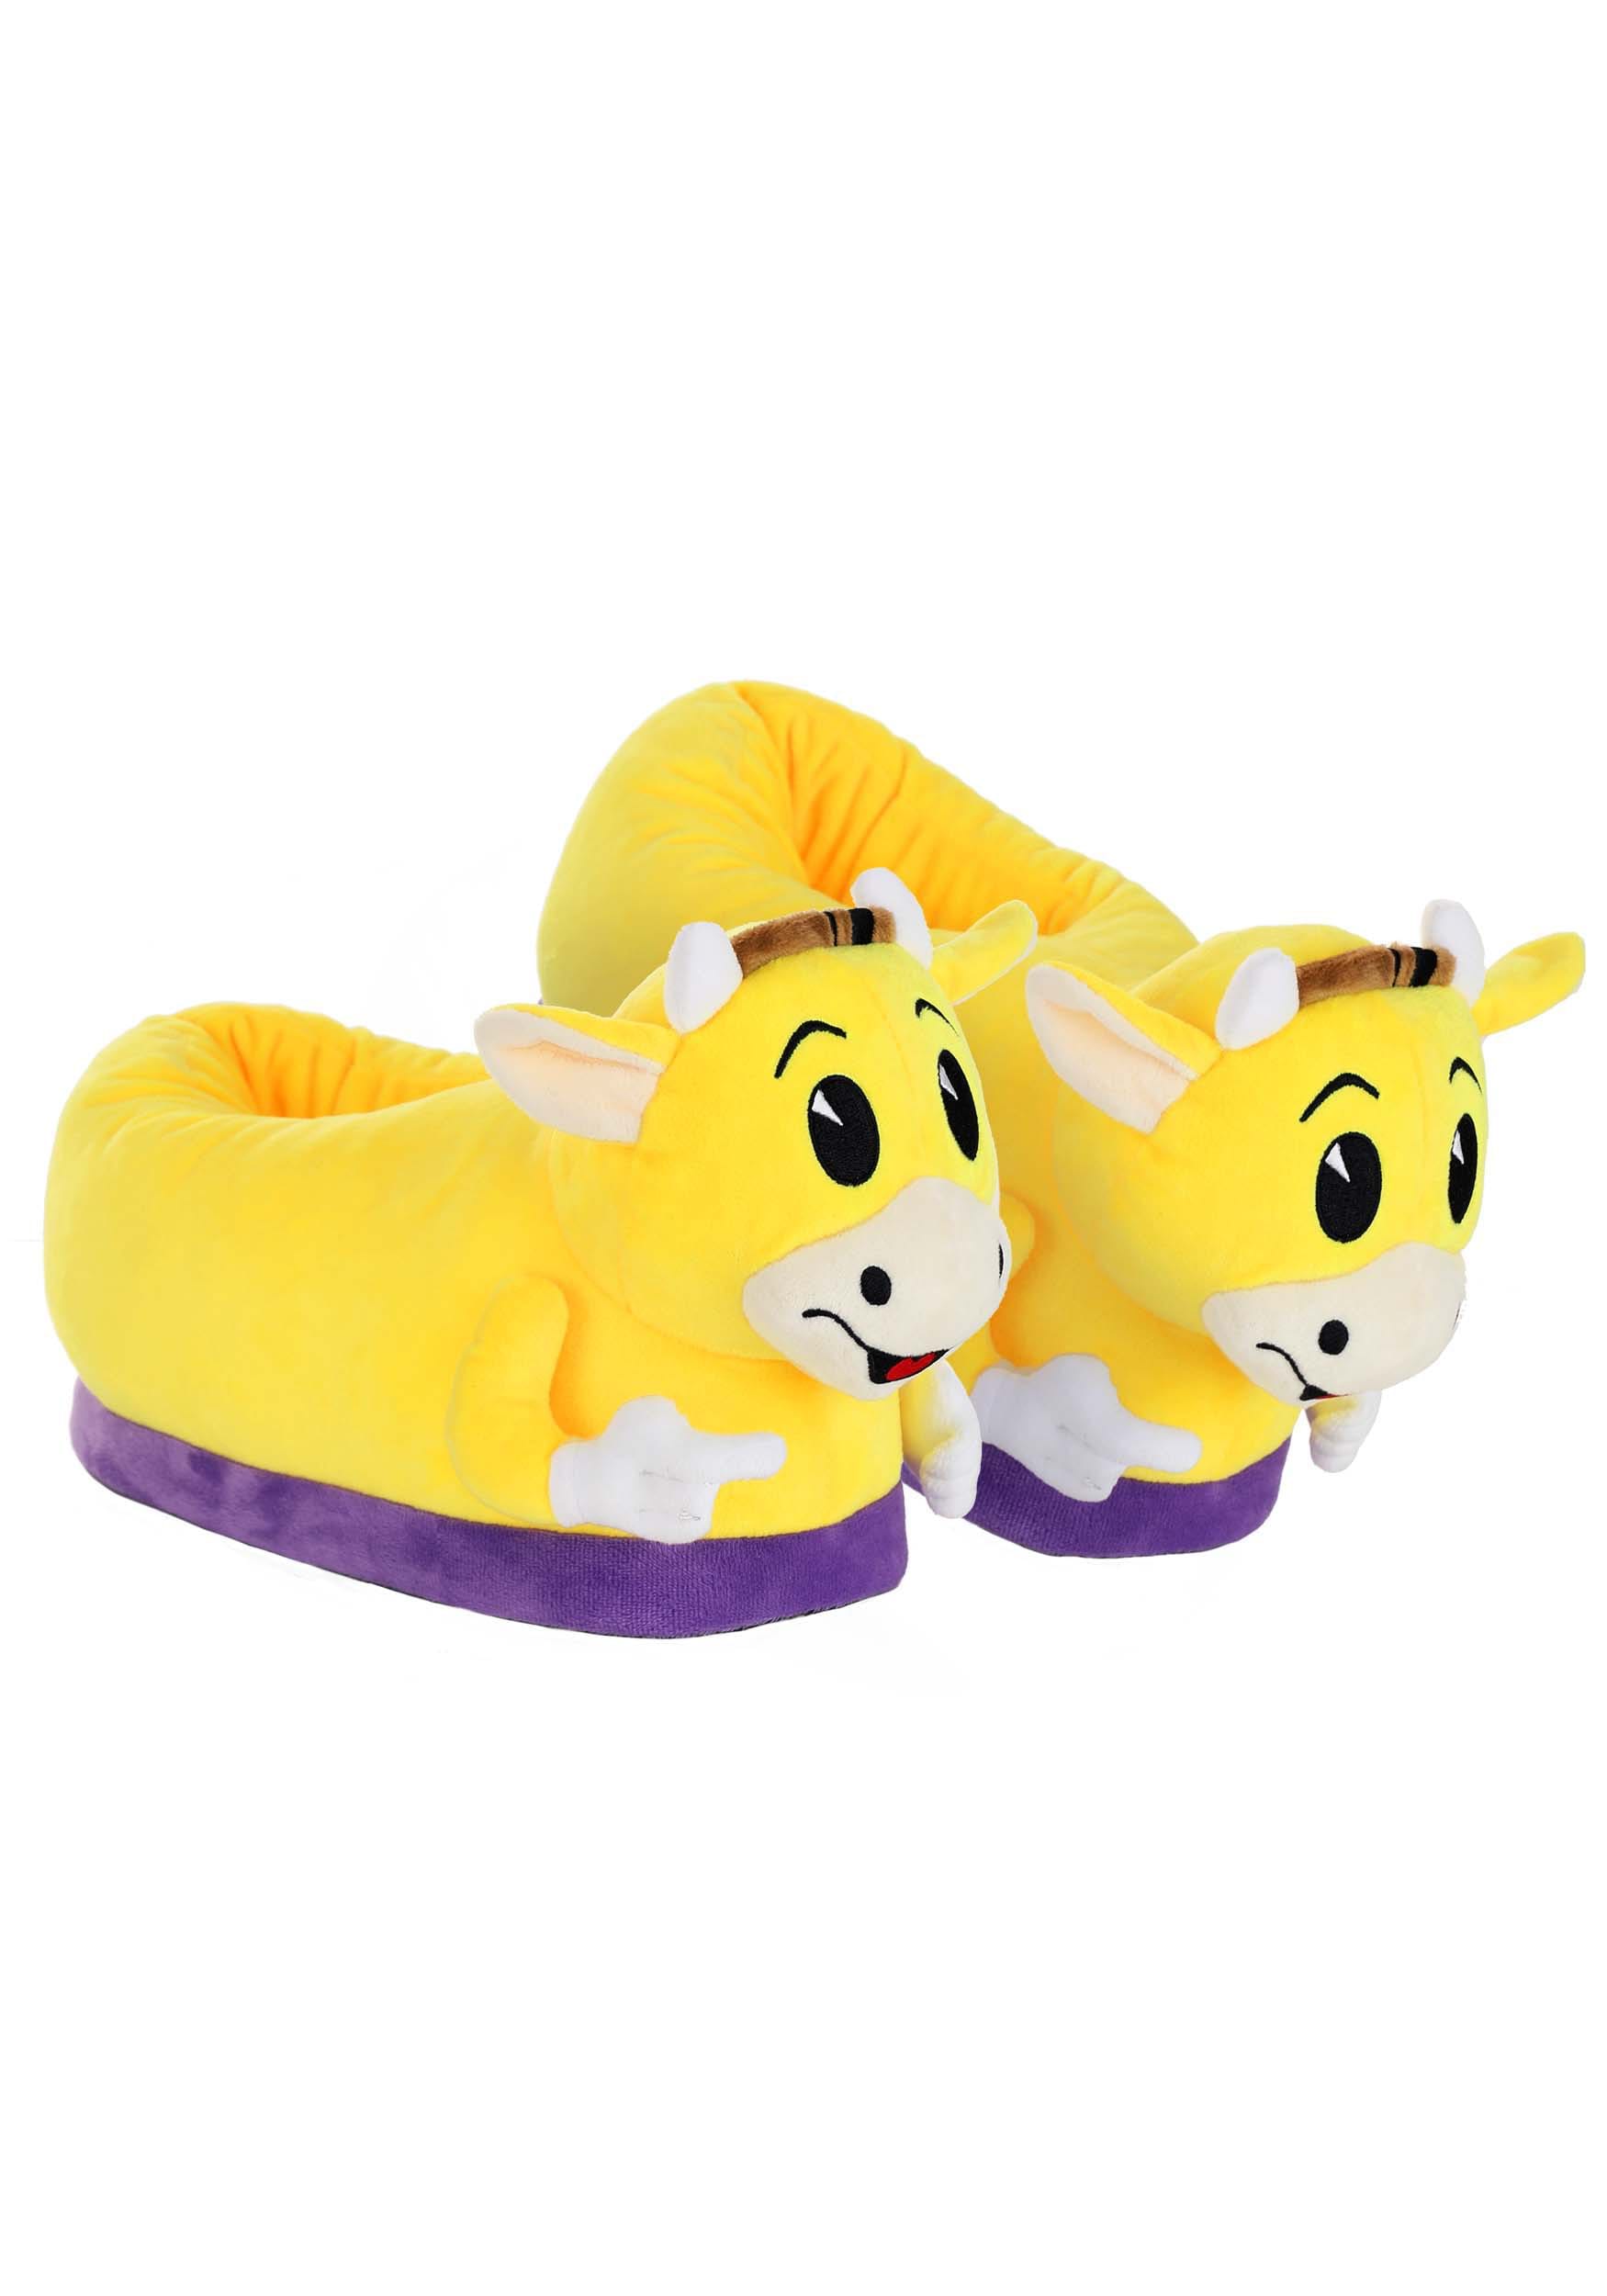 Jay and Silent Bob Moobys Slippers for Adults